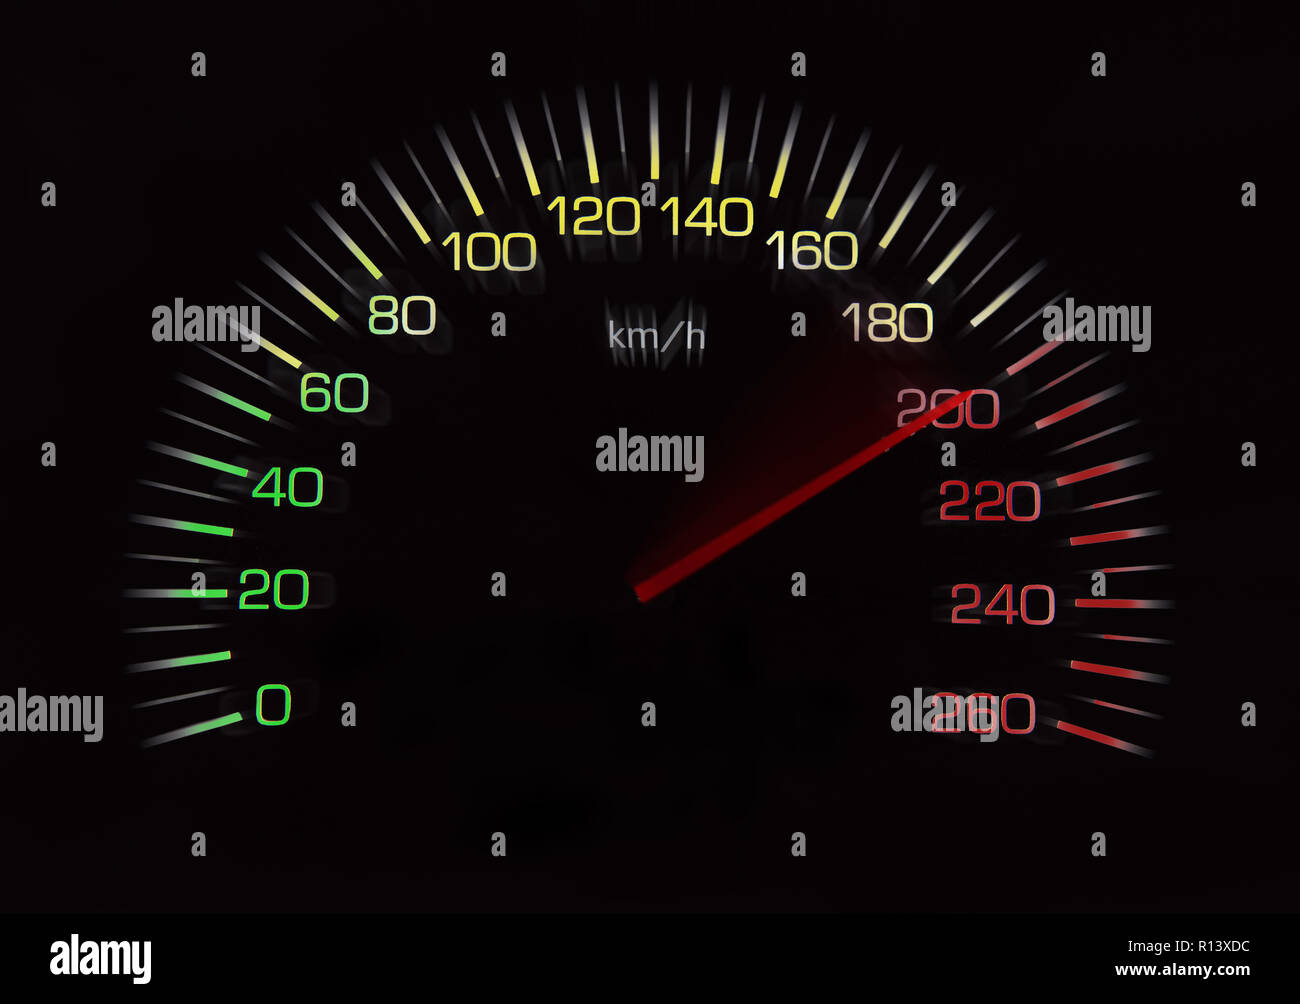 200 Kilometers per hour,light with car mileage with black background,number  of speed,Odometer of car Stock Photo - Alamy